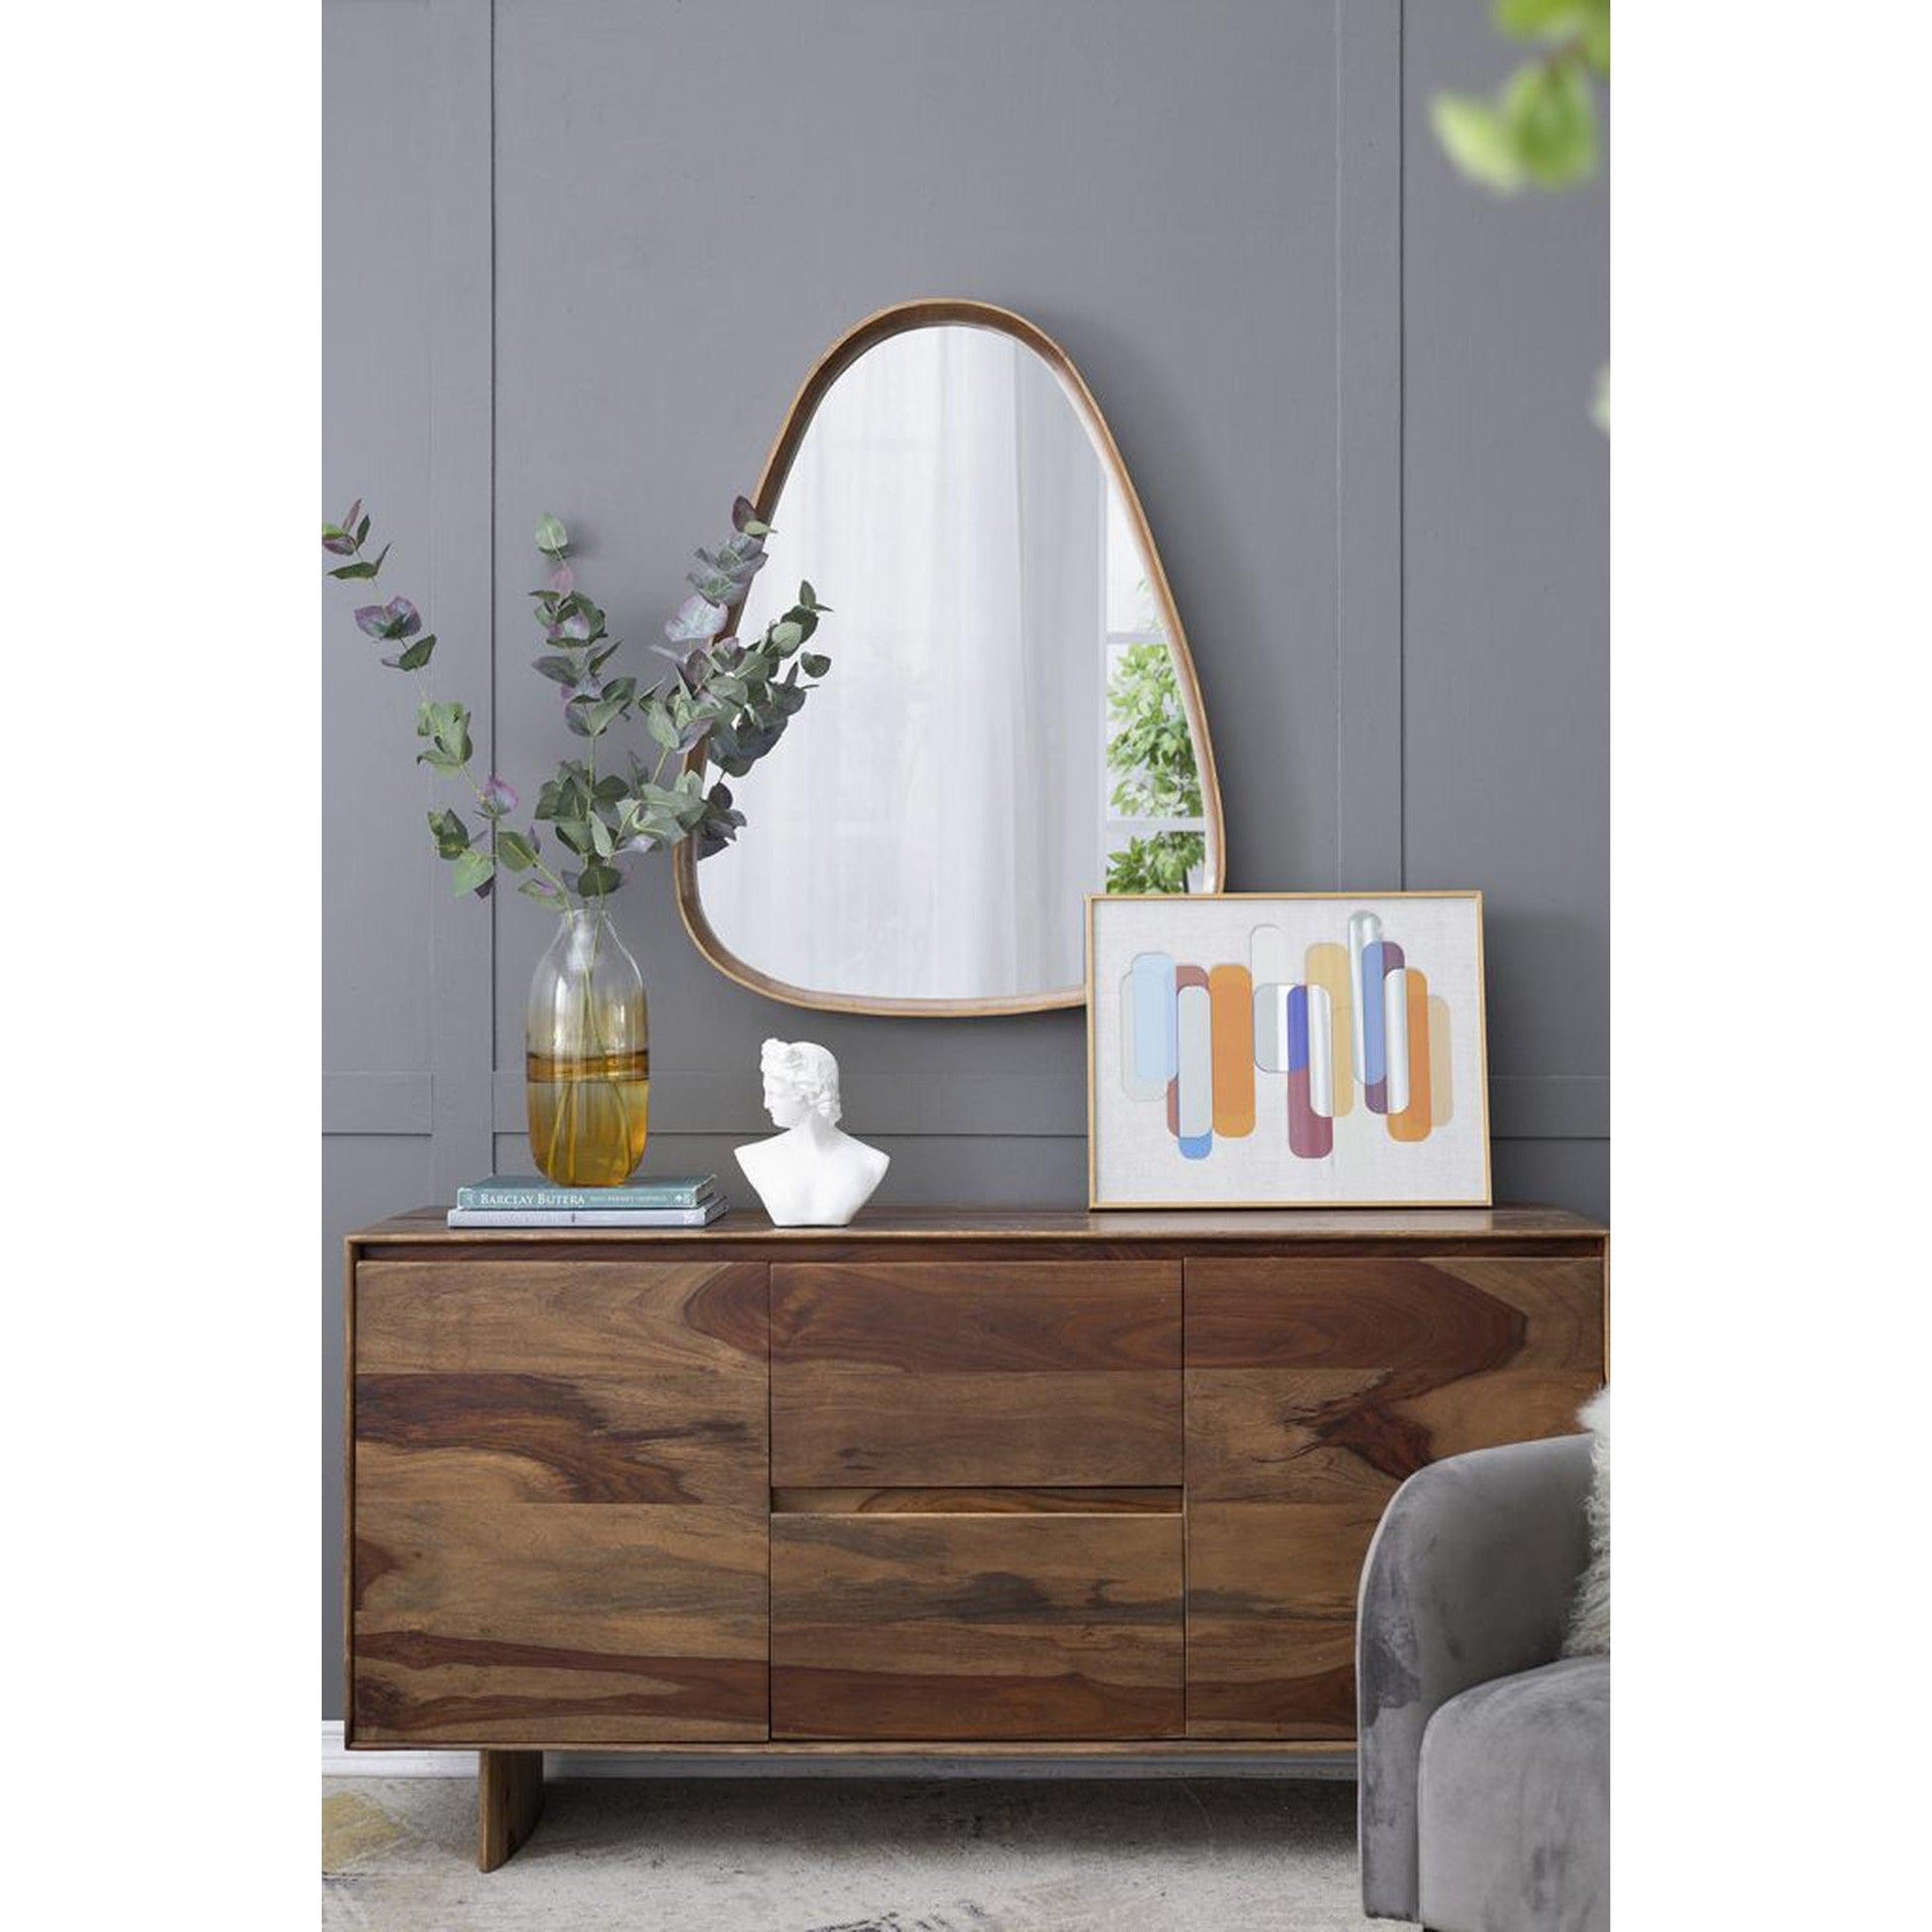 A&B Home Wayne 28" x 39" Bundle of 8 Teardrop Shape With Curved Edges Brown Wooden Frame Wall-Mounted Mirror